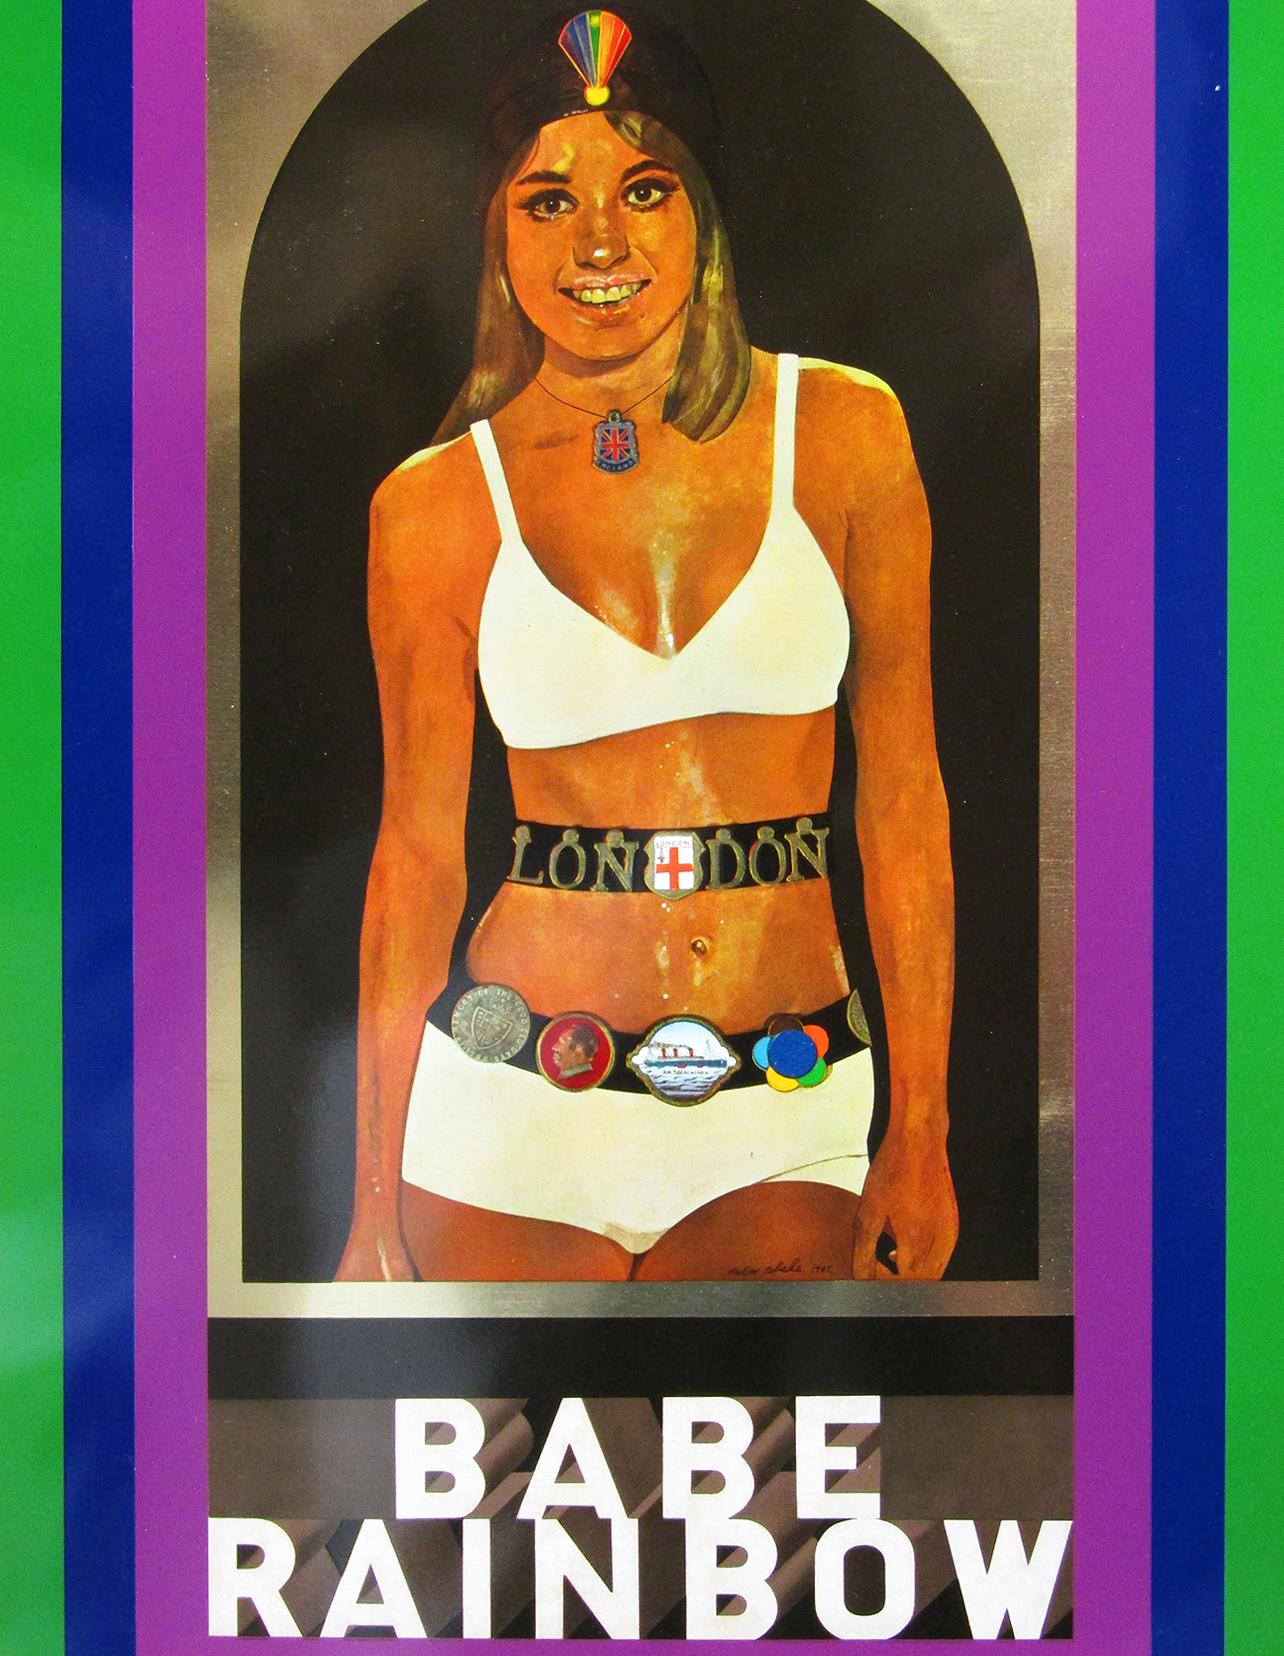 A vivid original 1968 screen print on tin by Peter Blake RA for Dodo Designs. It depicts a vintage pop-era subject of Blake's imagination; Babe Rainbow the female wrestler.

With one careful previous owner, this print is in close to perfect